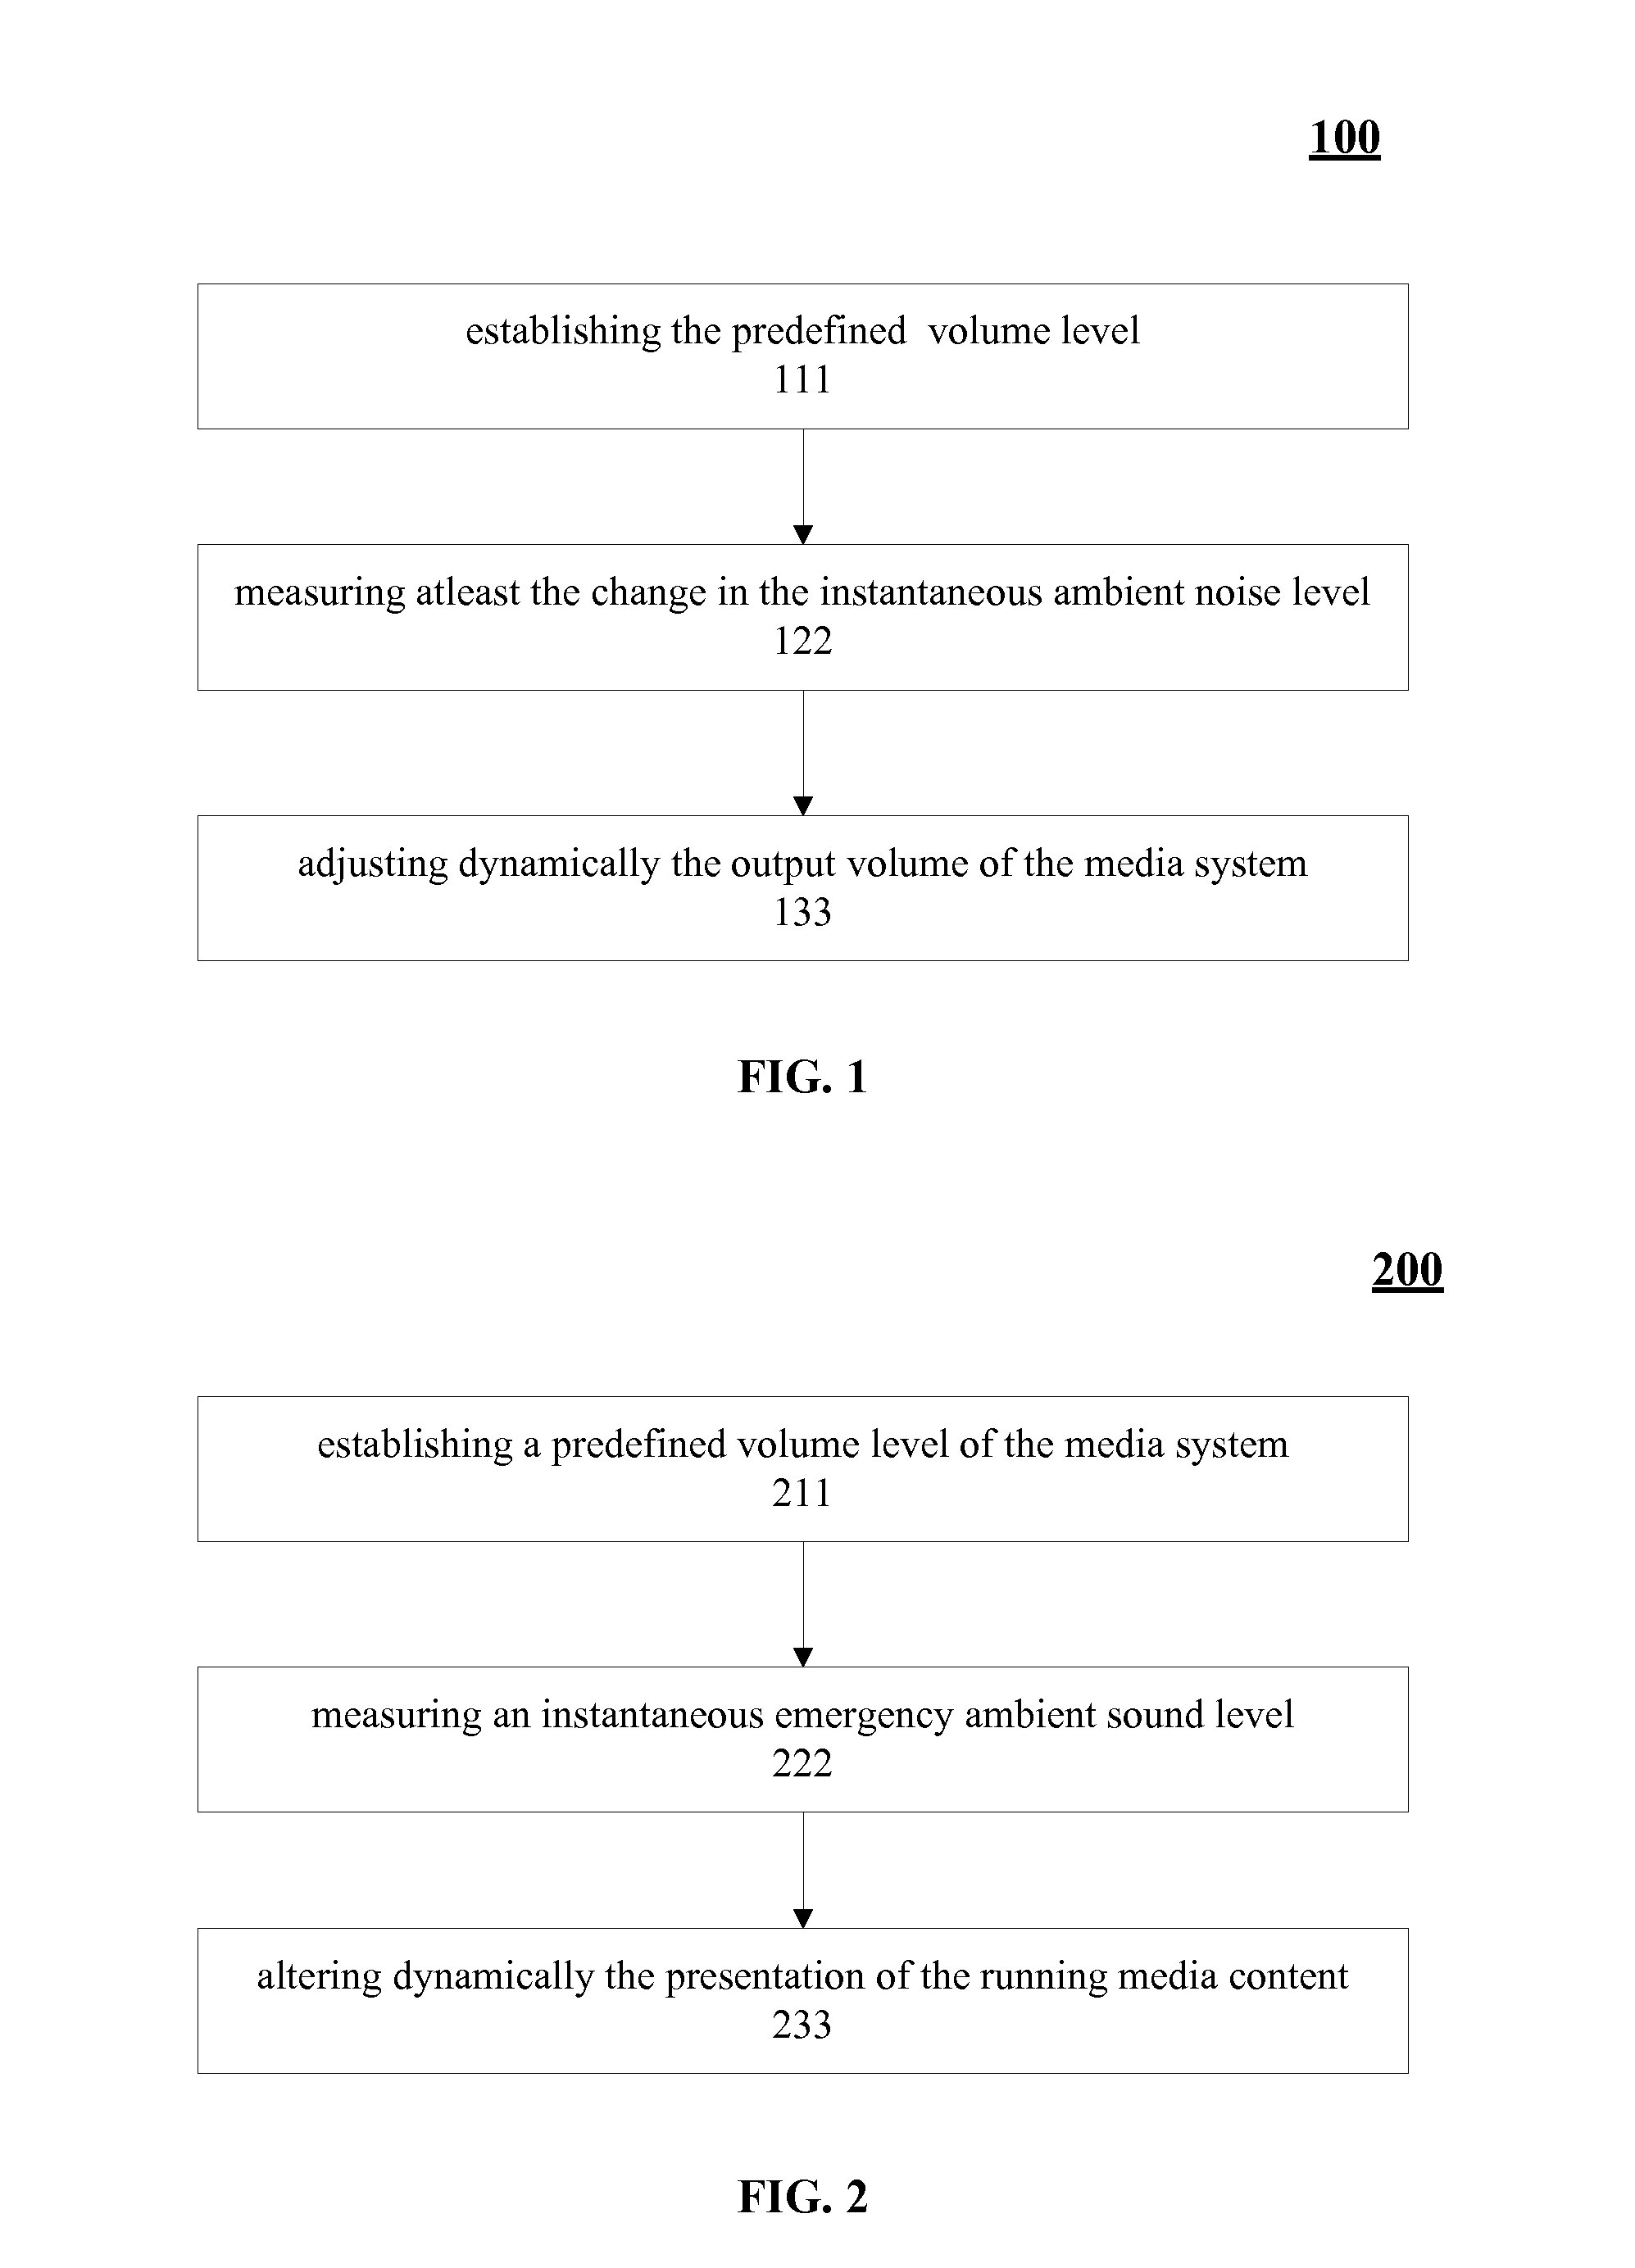 System and methods for dynamically controlling atleast a media content with changes in ambient noise